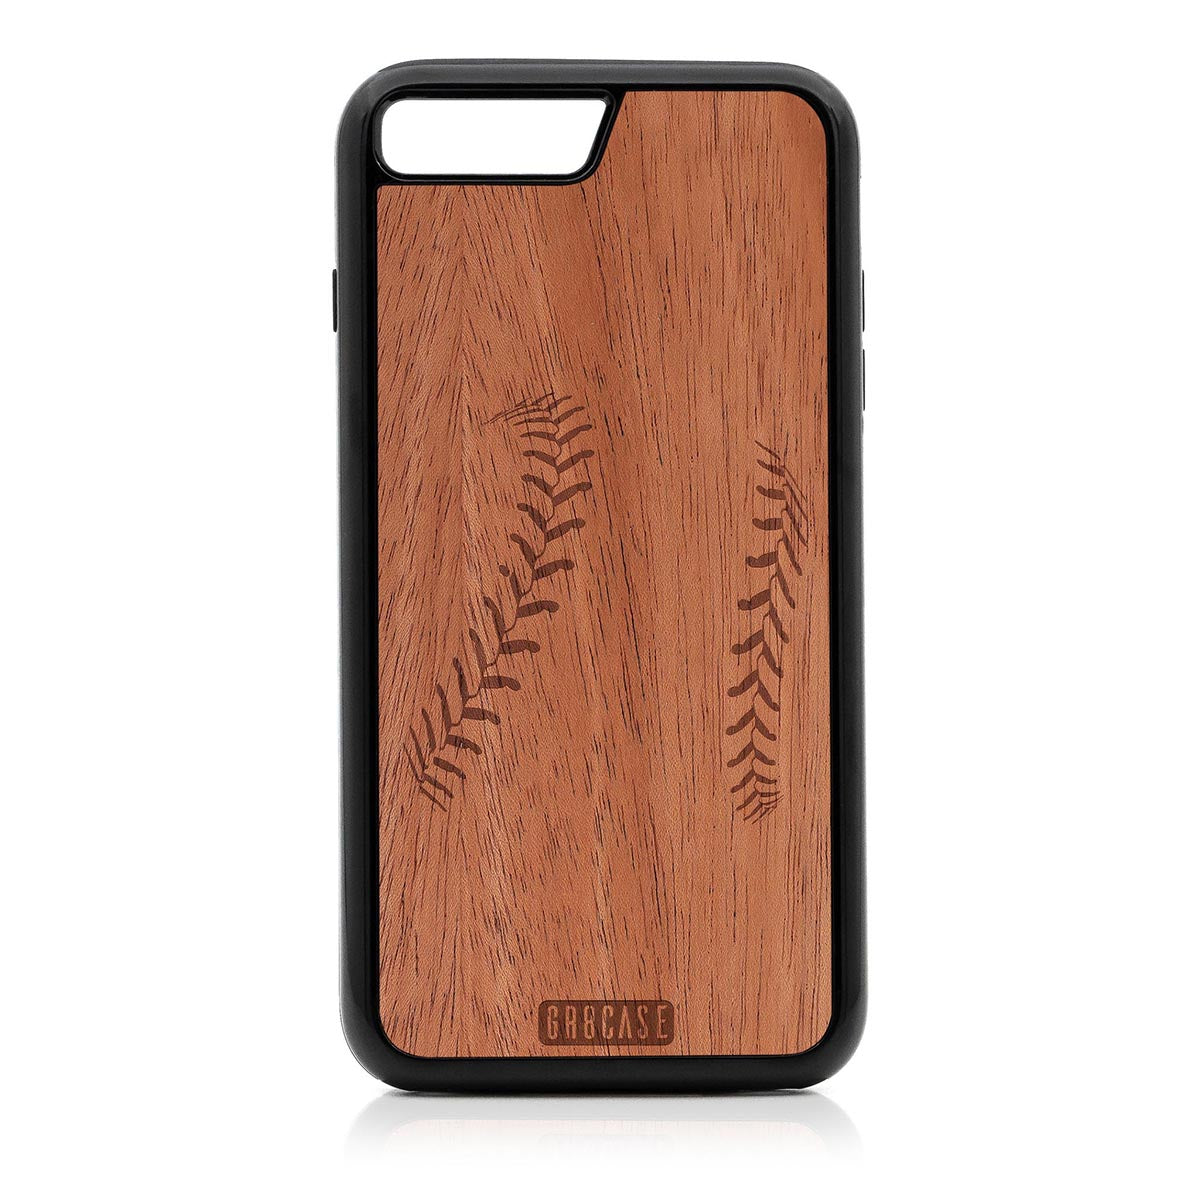 Baseball Stitches Design Wood Case For iPhone 7 Plus / 8 Plus by GR8CASE